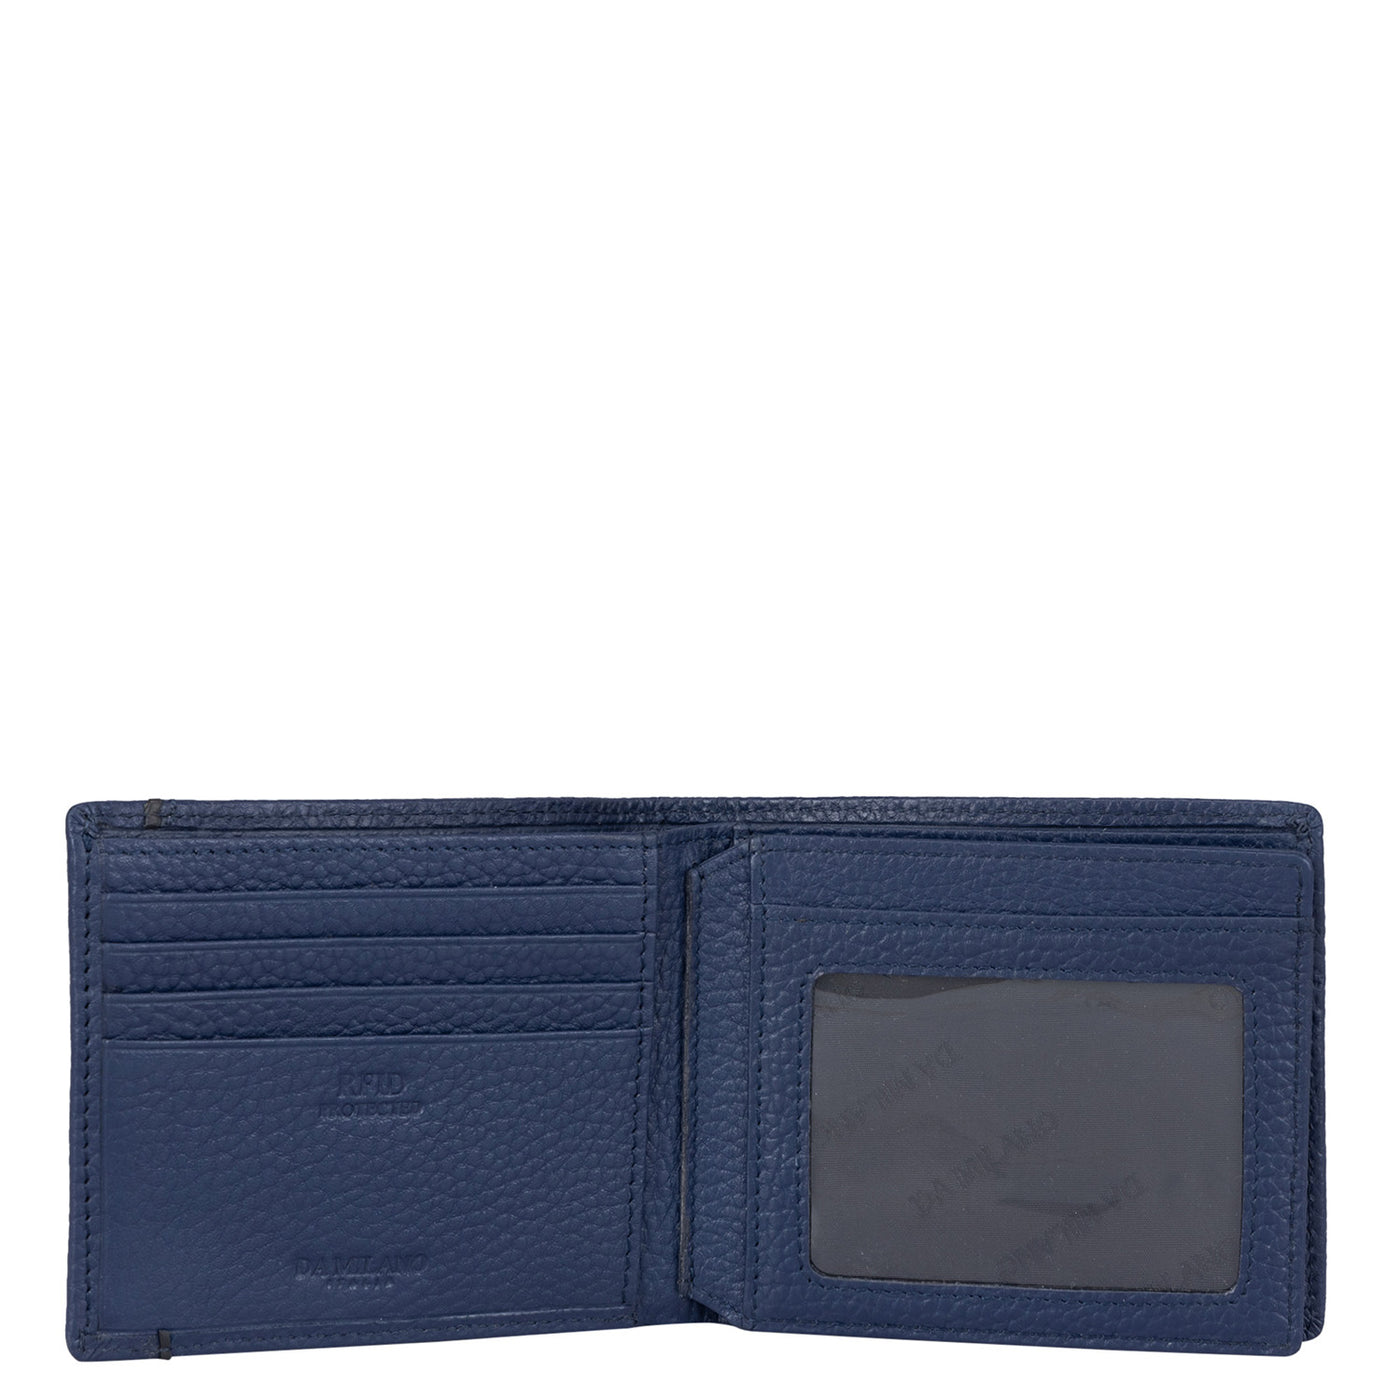 Wax Leather Mens Wallet - Patriot Blue